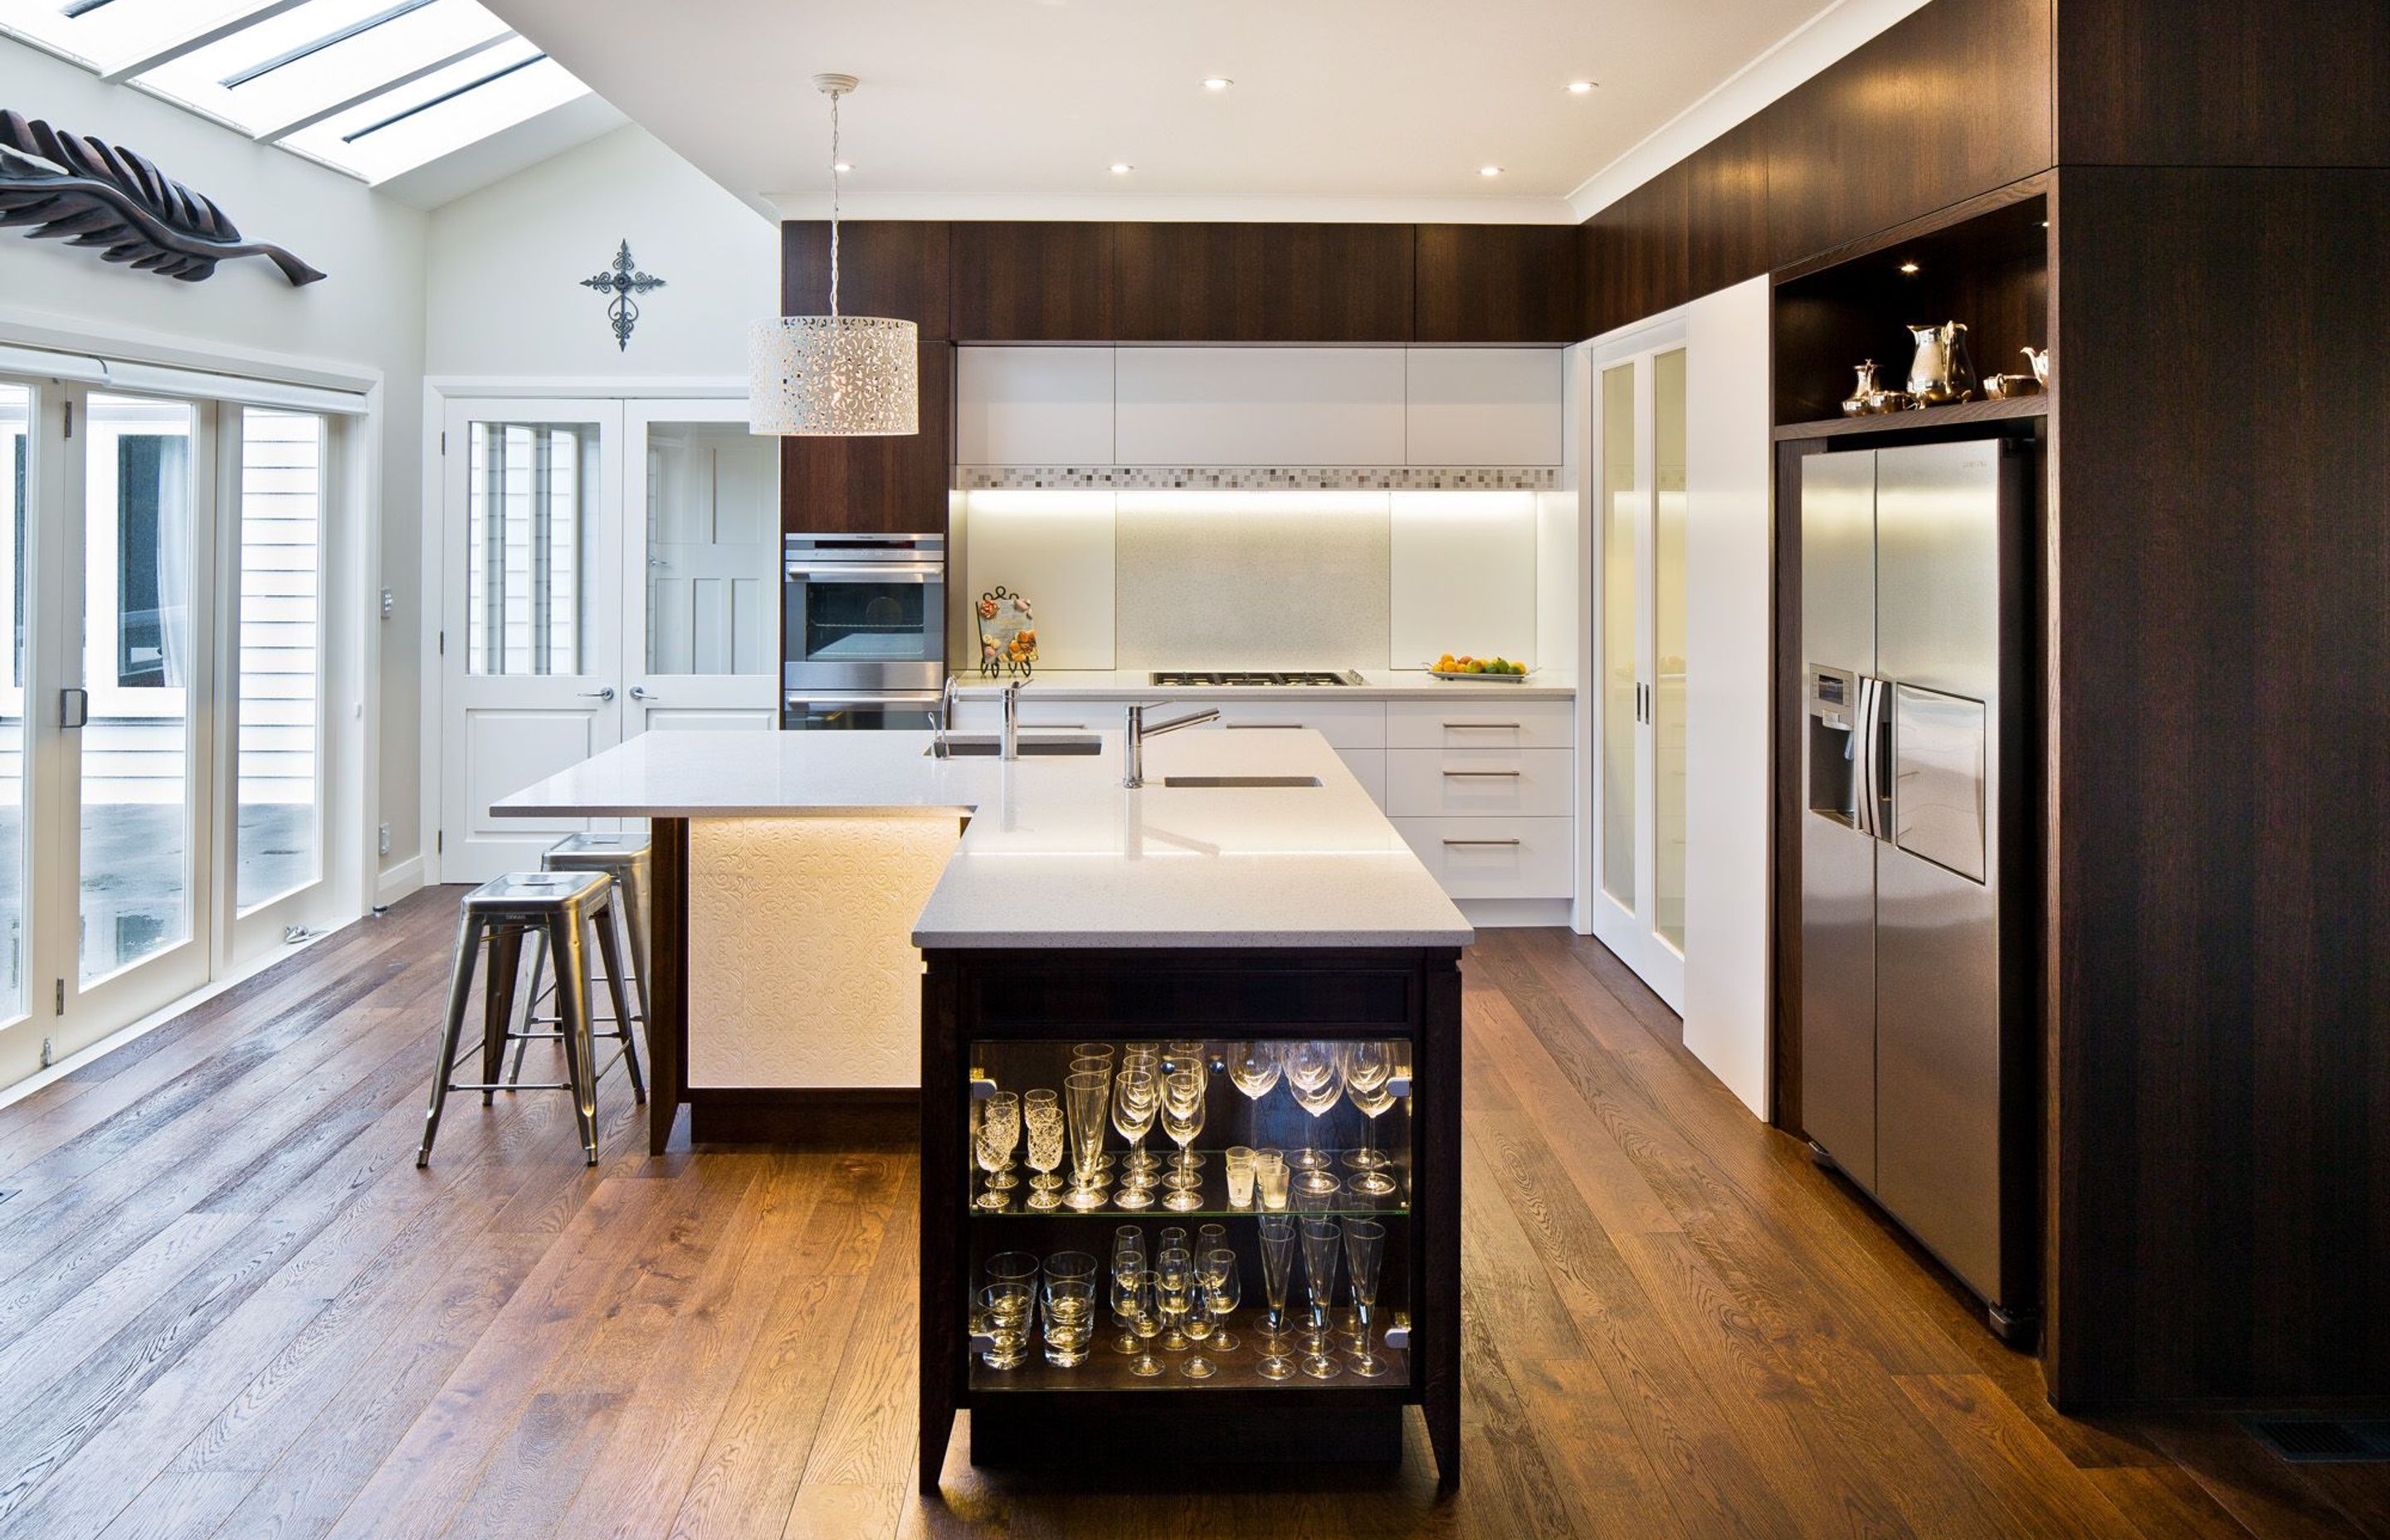 Simone always looks for ways to bring extra storage to a kitchen, and work within the existing space if required.